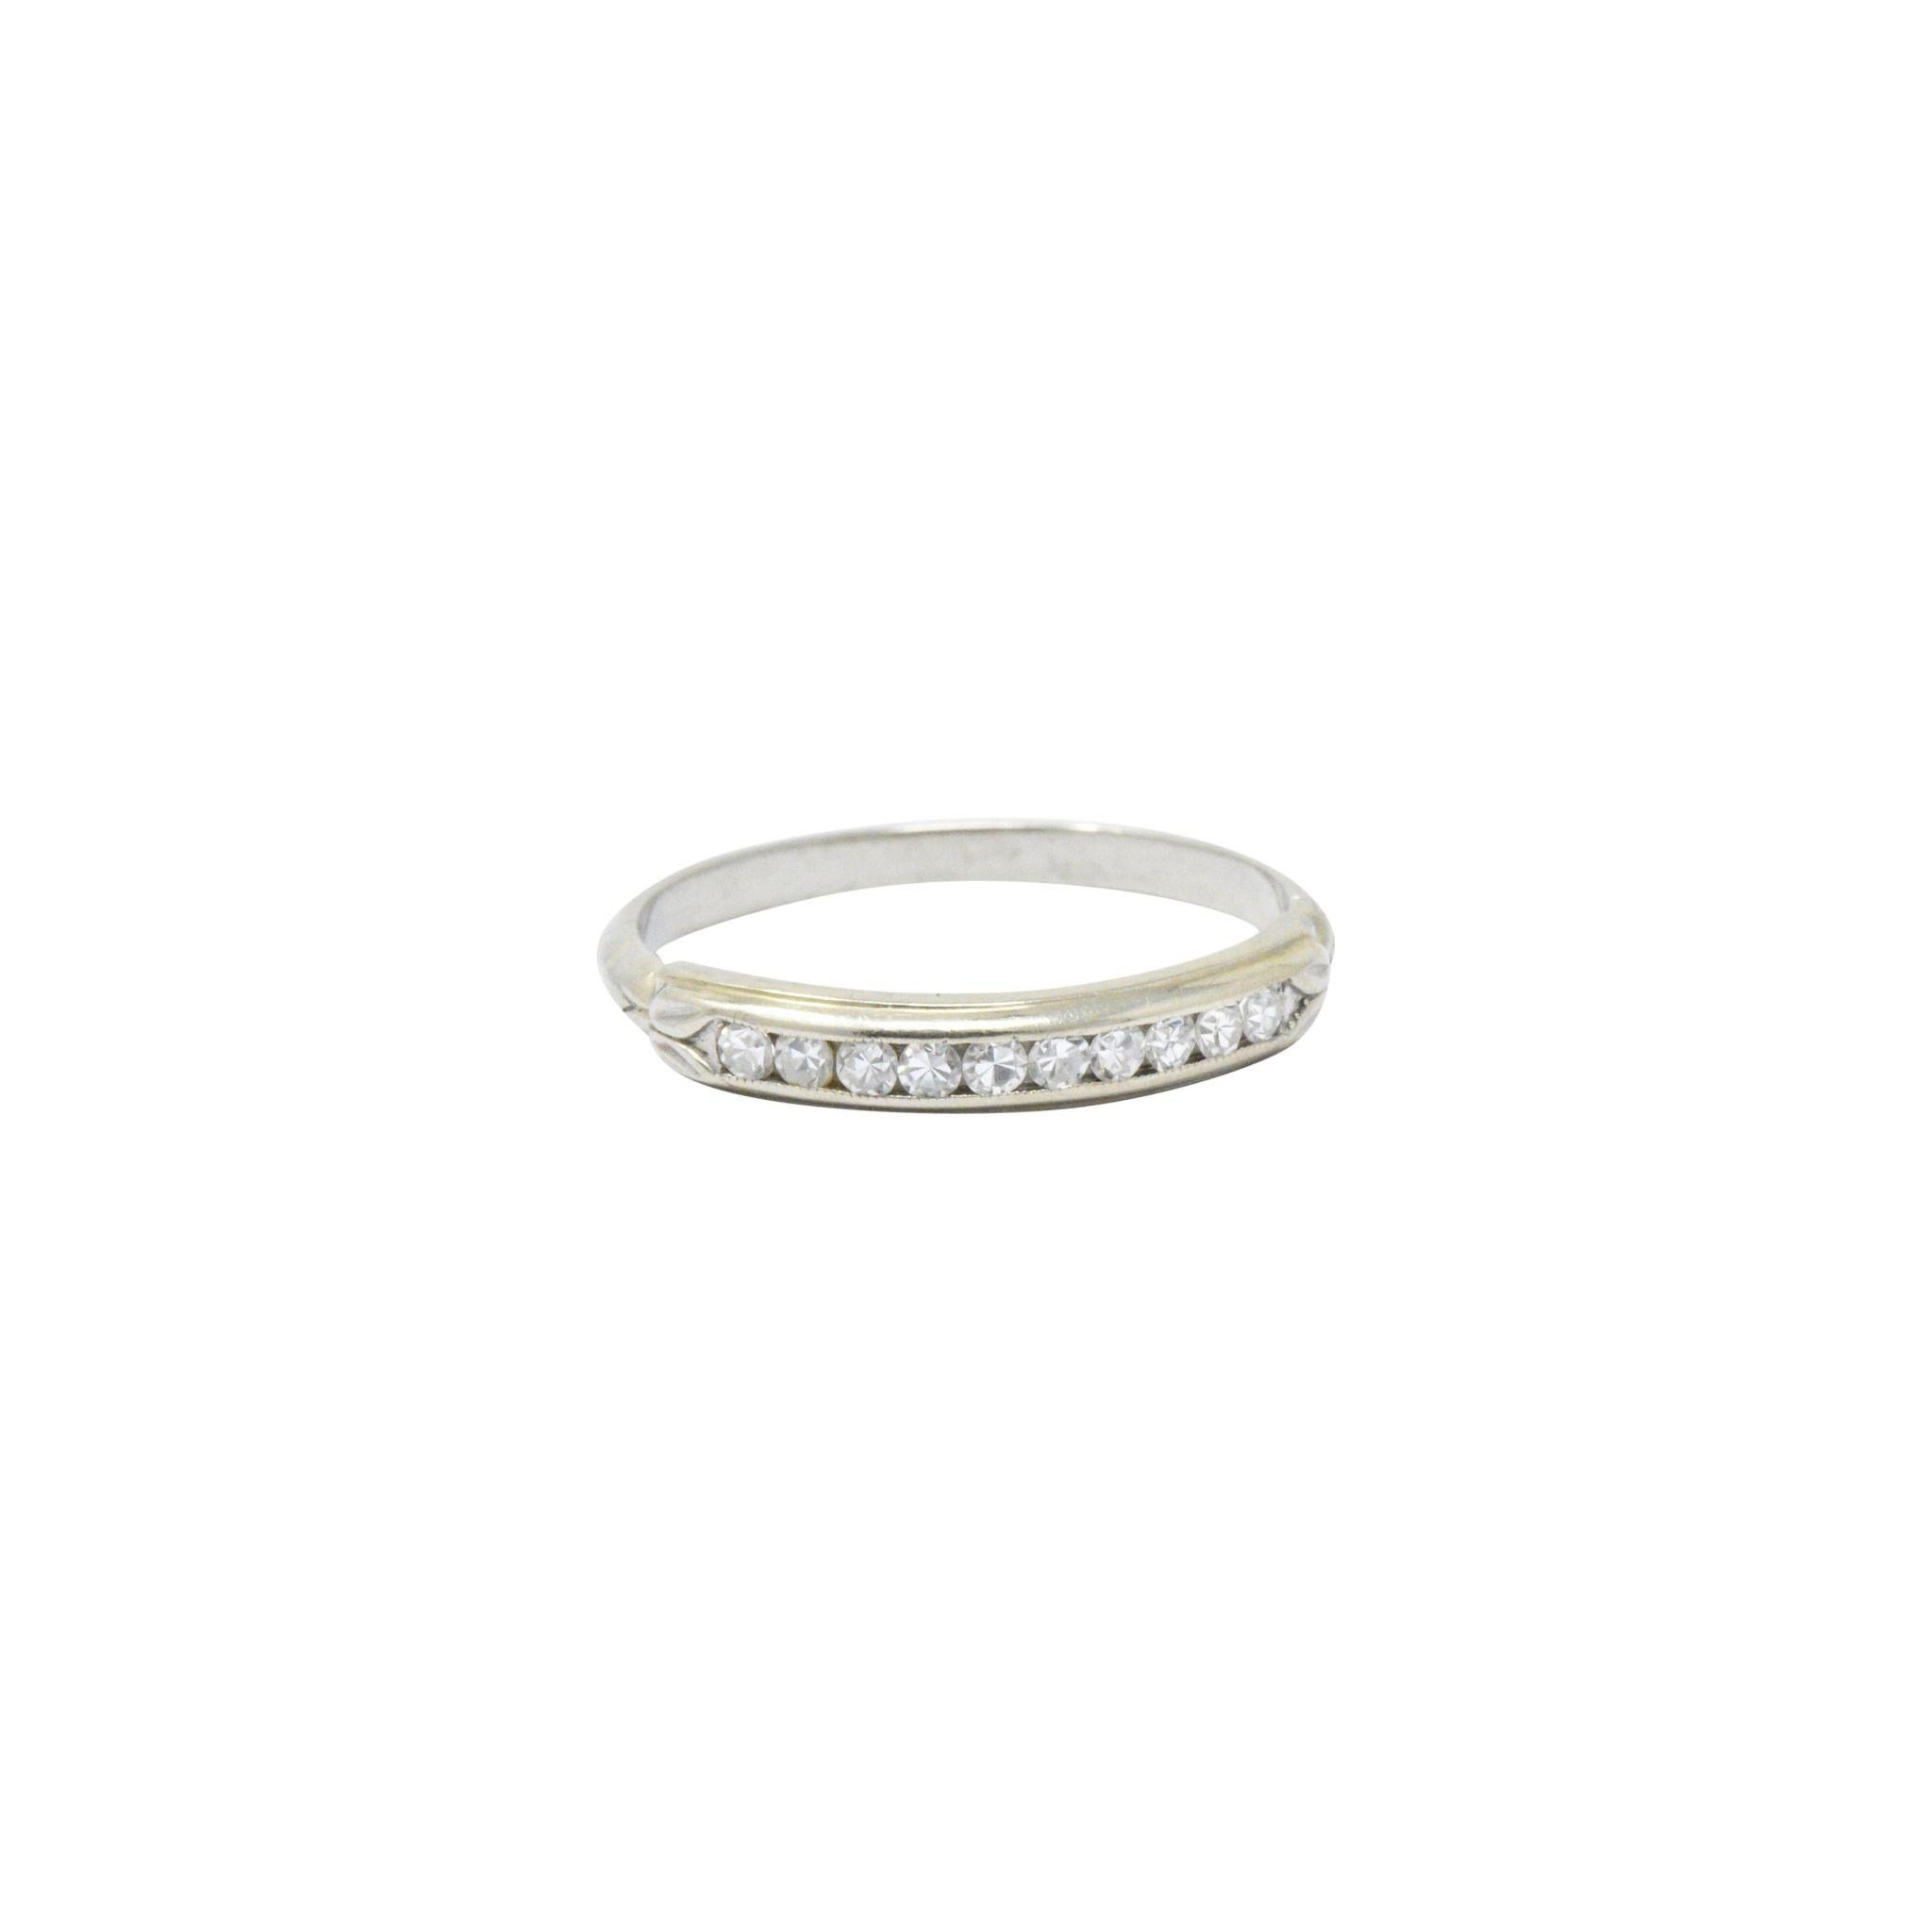 Channel set to the front with ten single cut diamonds, approximately 0.20 carats total, F/G color, VS to SI clarity 

Delicate foliate motif detail to the gold flanking the diamonds

Can be worn as a wedding band or as a great stacking ring

Ring